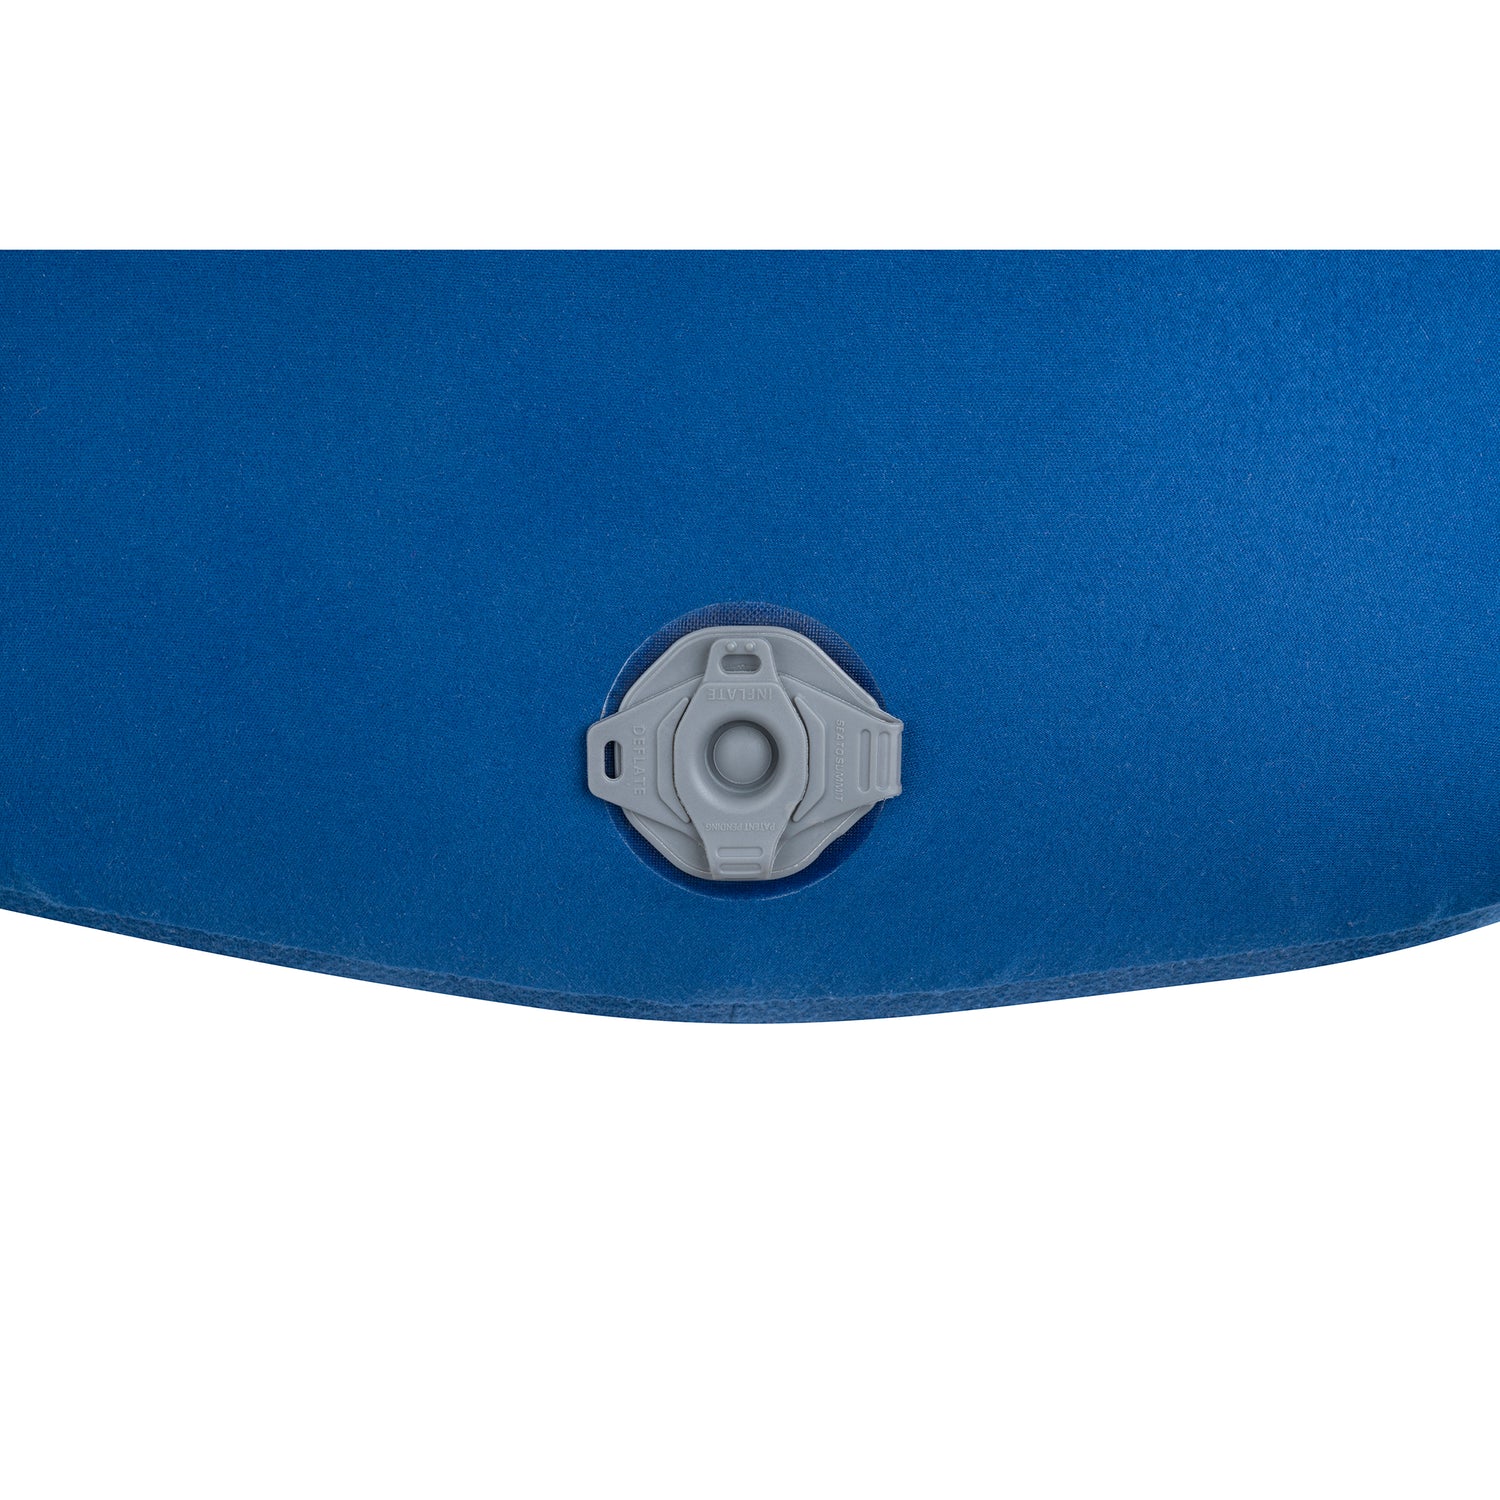 Core Products Small Inflatable Lumbar Cushion - Blue